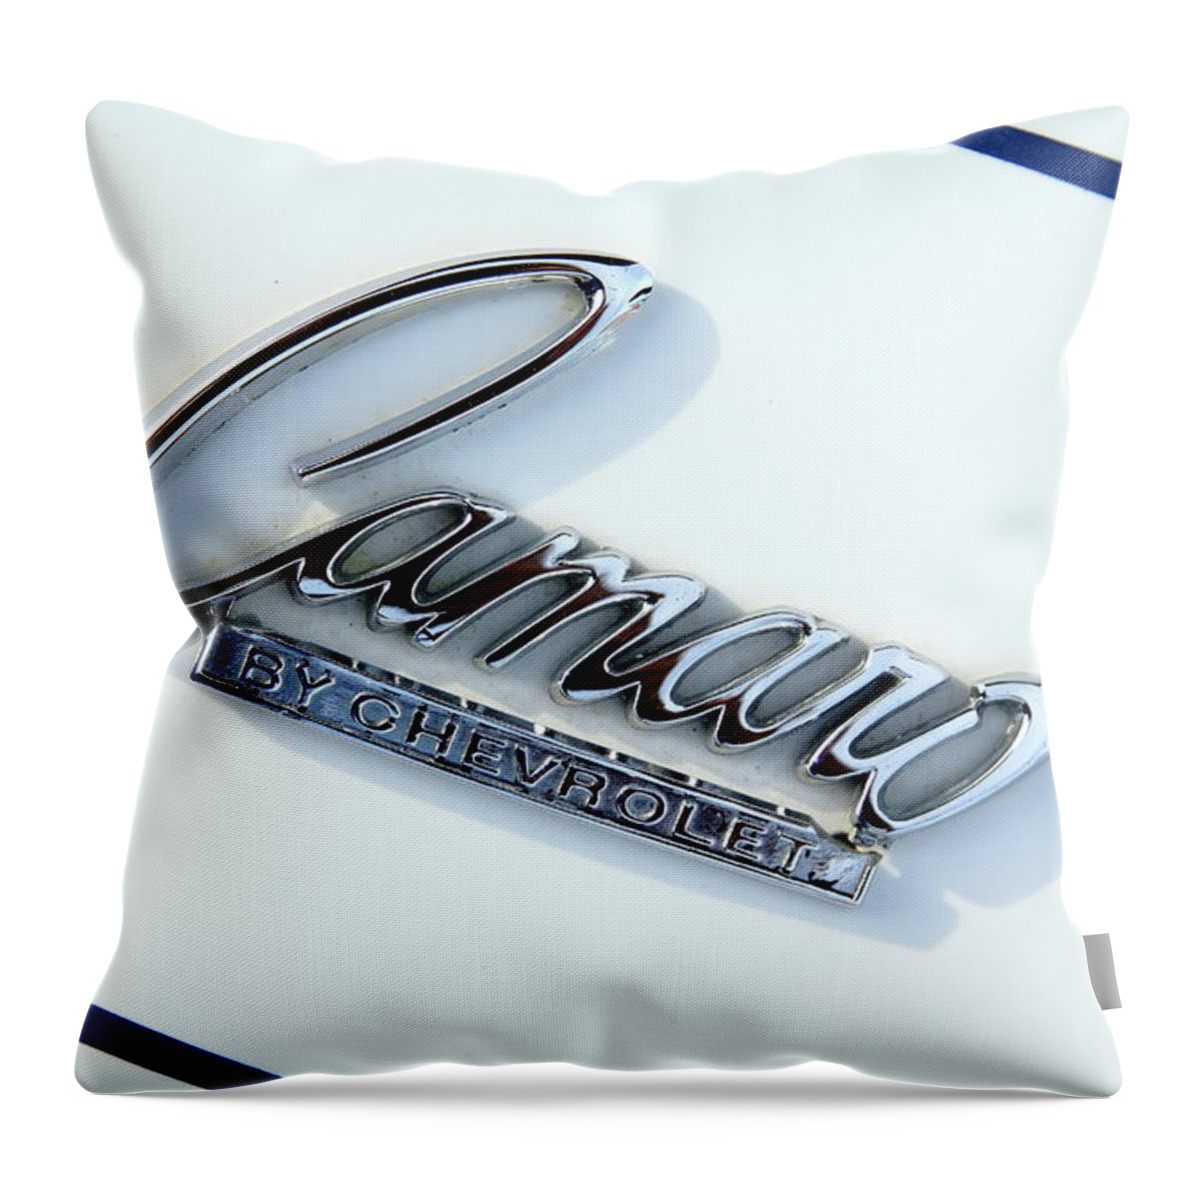 Chevrolet Camaro Ss Throw Pillow featuring the photograph Striped Cam by Lens Art Photography By Larry Trager